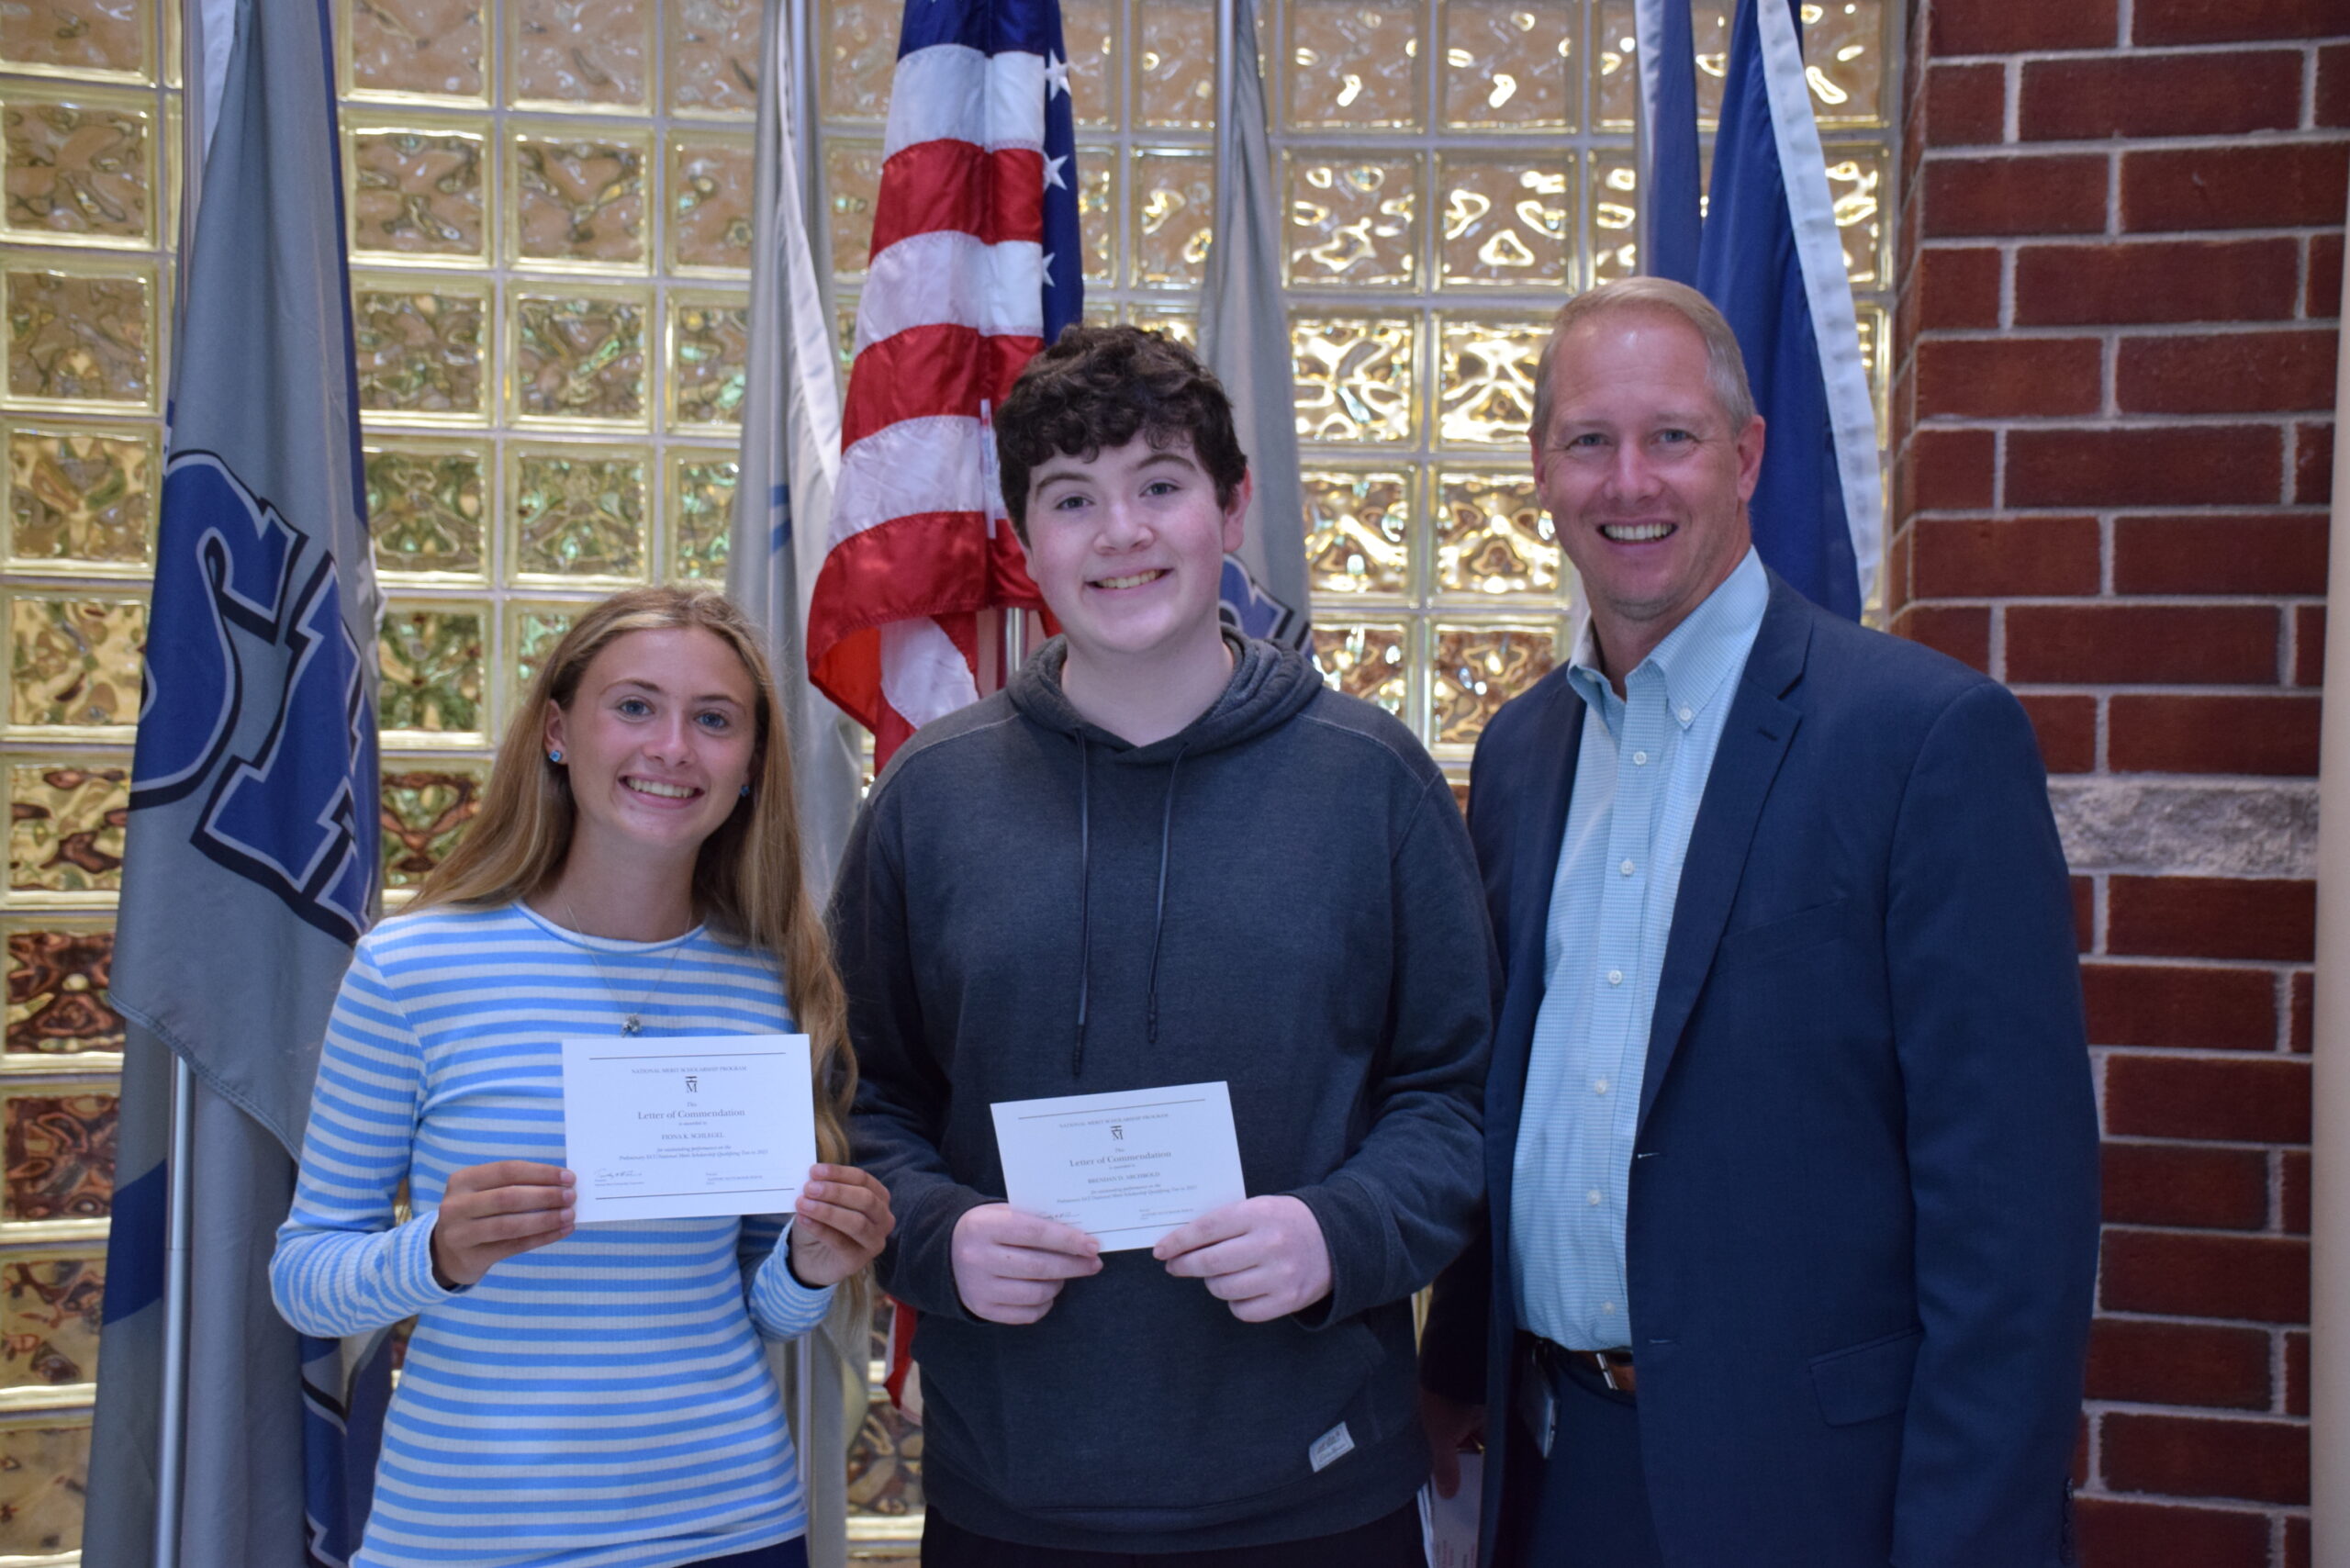 Eastport-South Manor Junior-Senior High School seniors Fiona Schlegel and Brendan
Archbold were named commended students in the National Merit Scholarship Program. They are congratulated by Principal Salvatore Alaimo. COURTESY EASTPORT-SOUTH MANOR SCHOOL DISTRICT